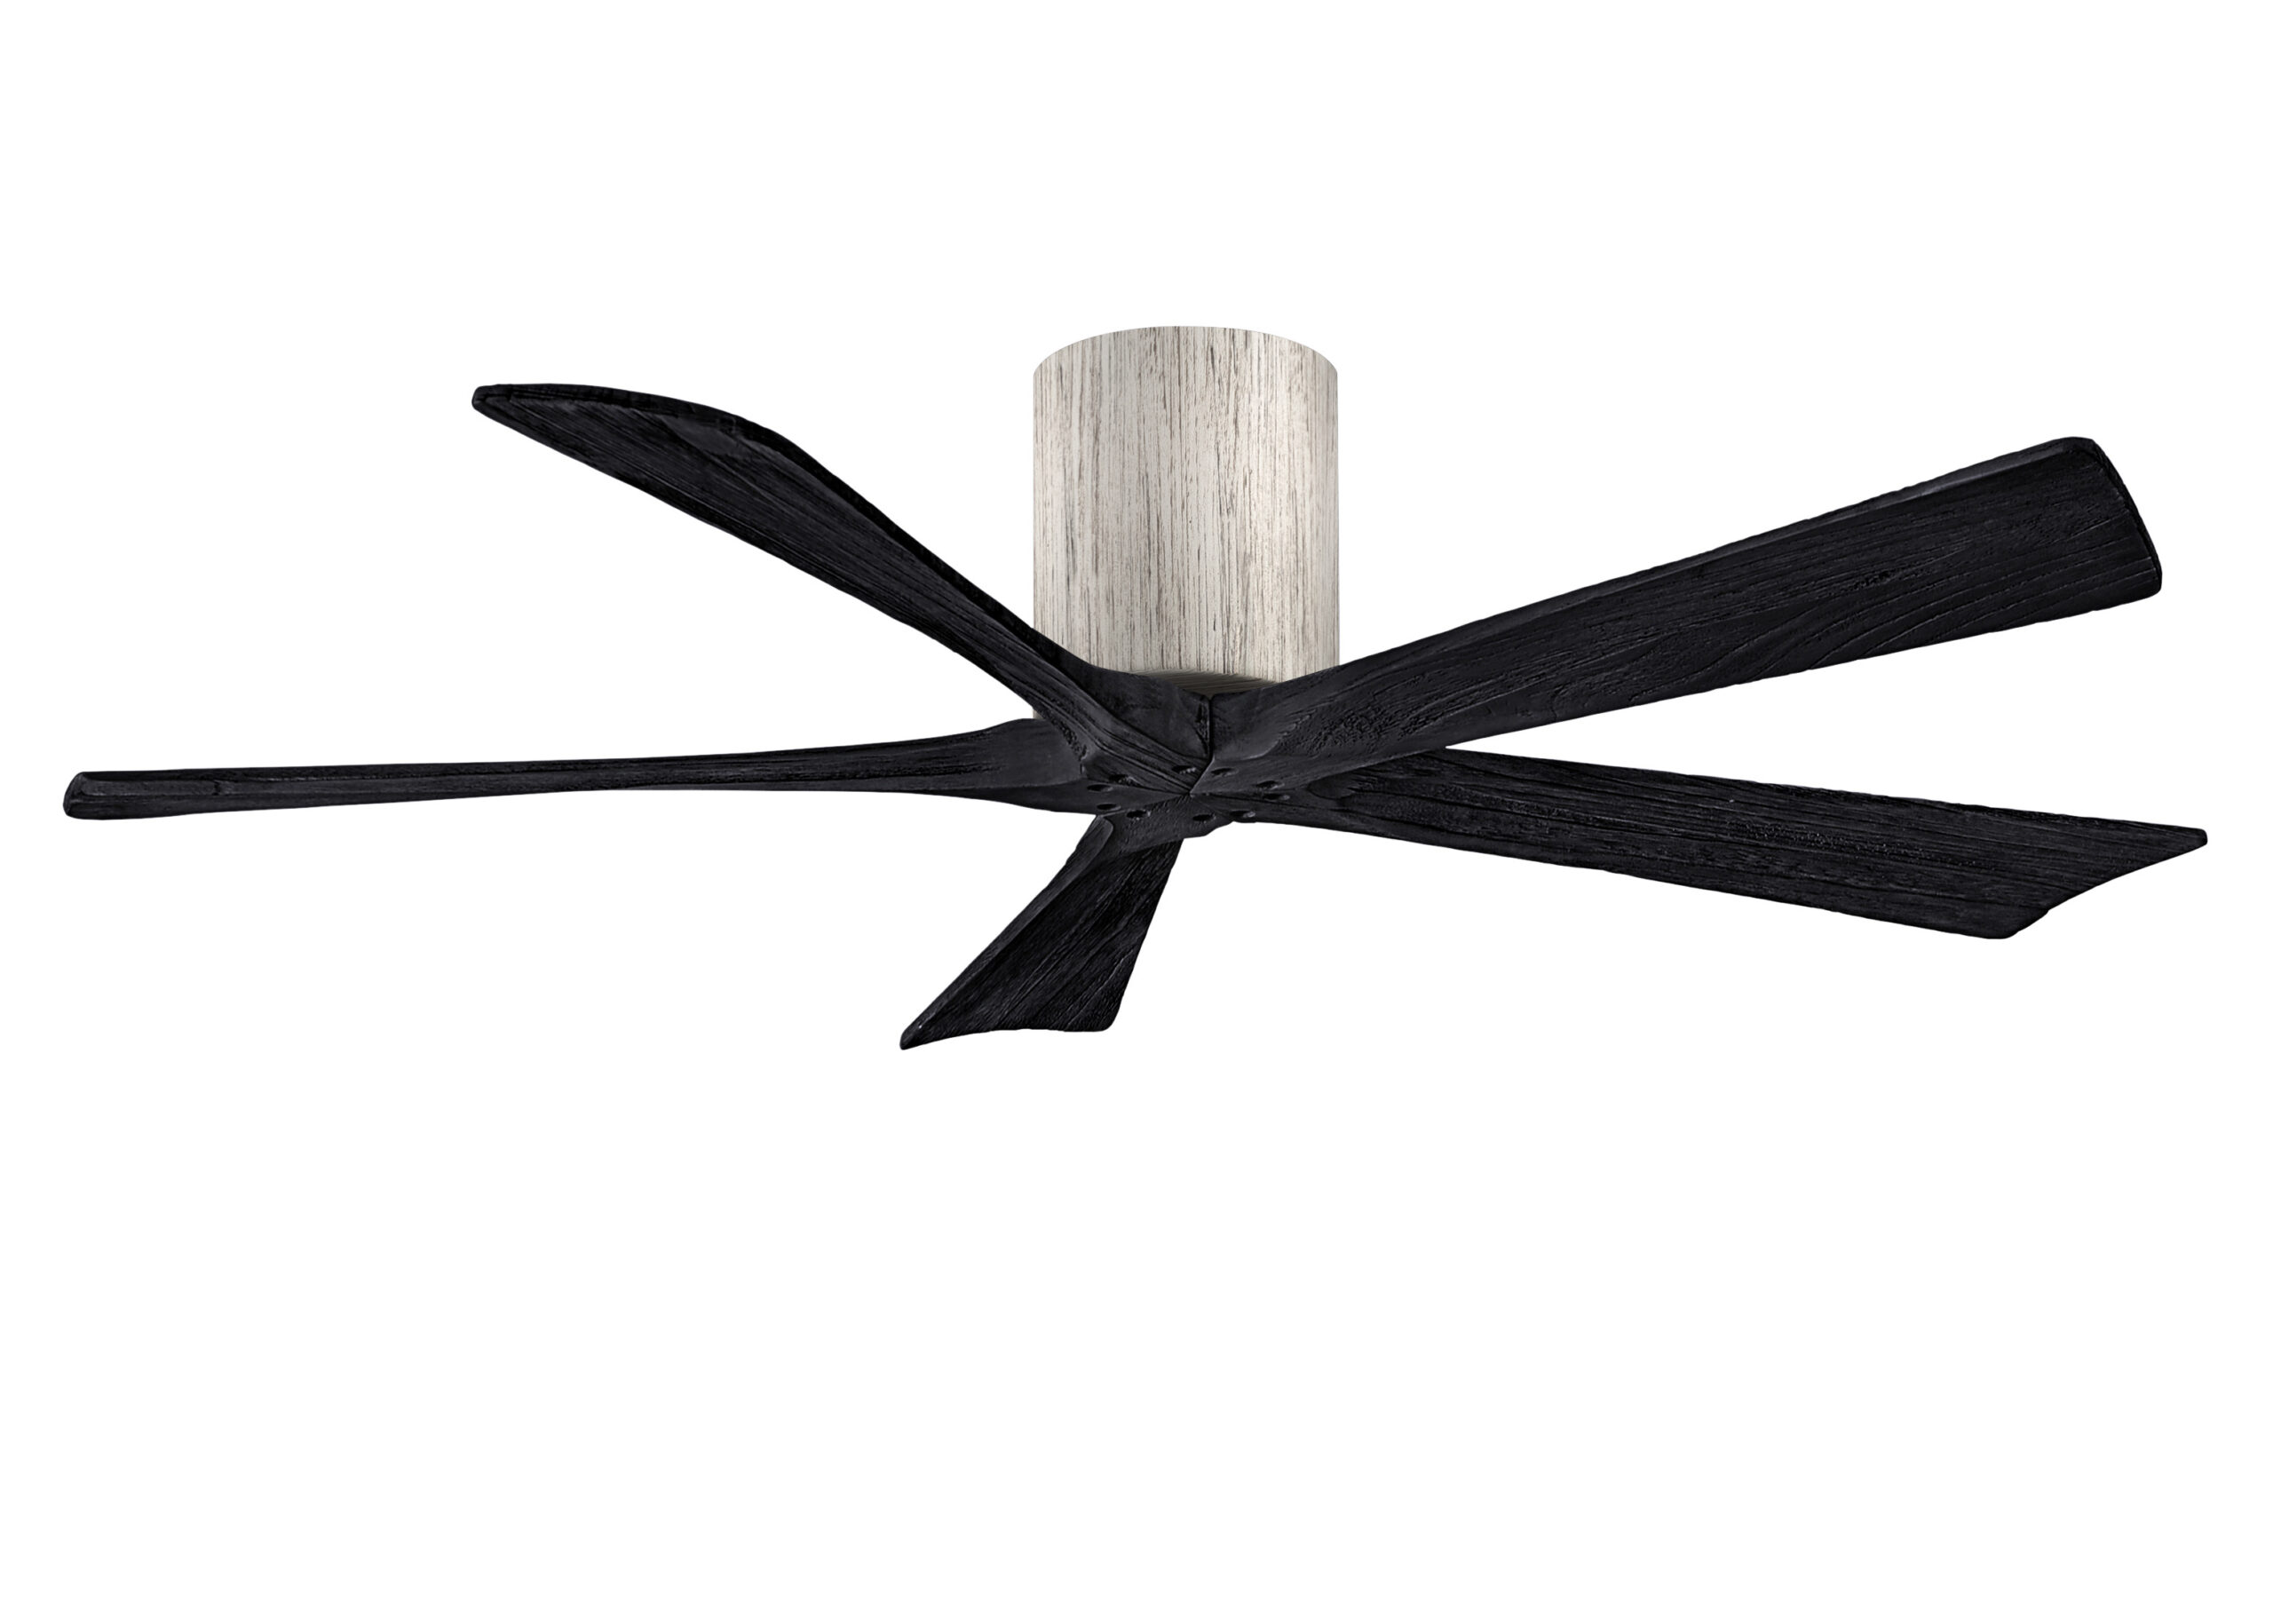 Irene-5H Ceiling Fan in Barn Wood Finish with 52